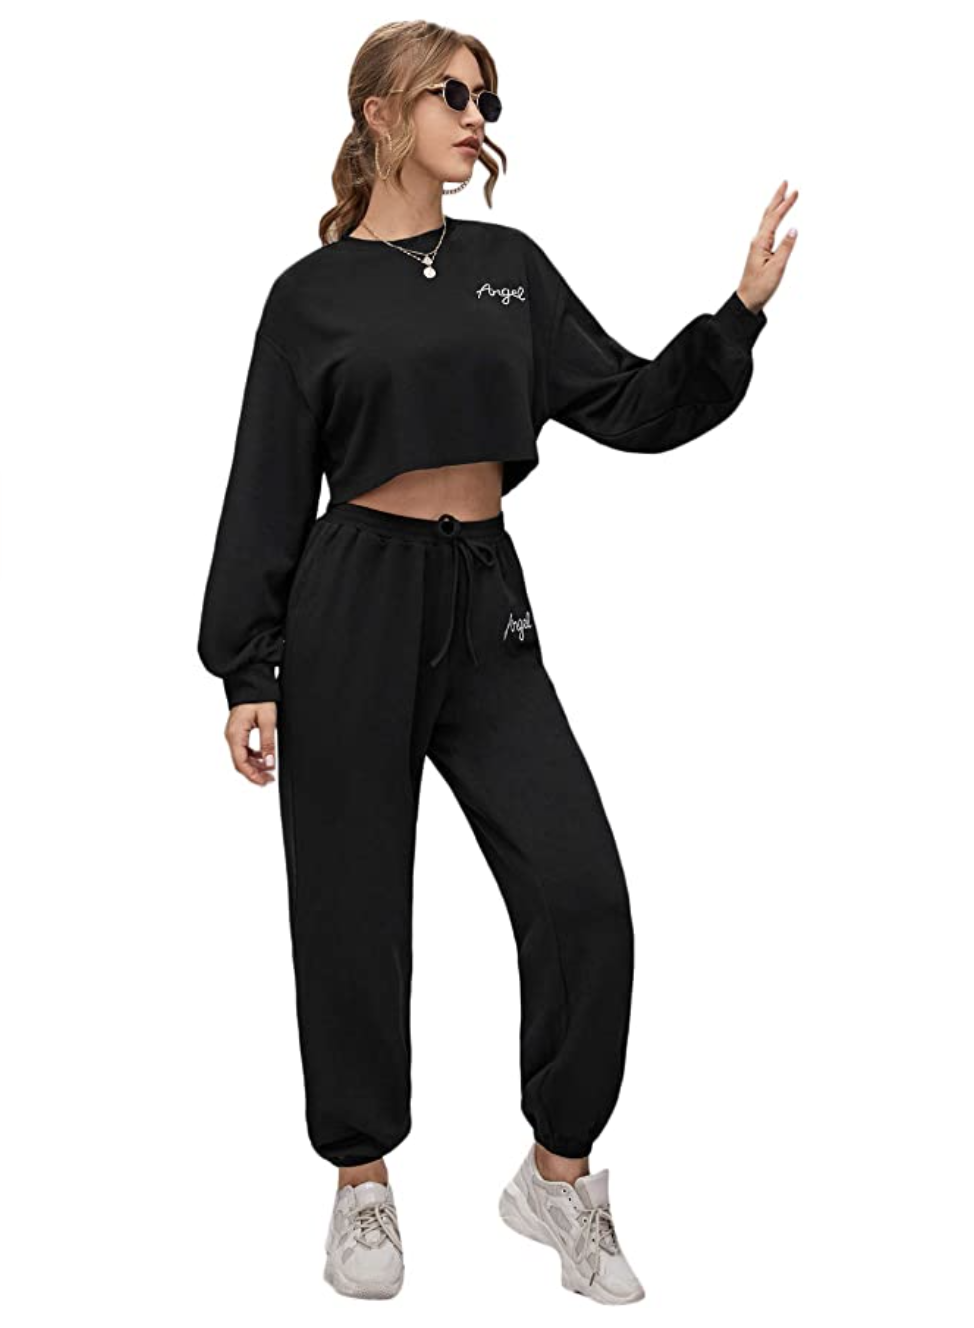 Fashion Set! Two Piece Outfits For Women Warm Fleece Lined Jogger